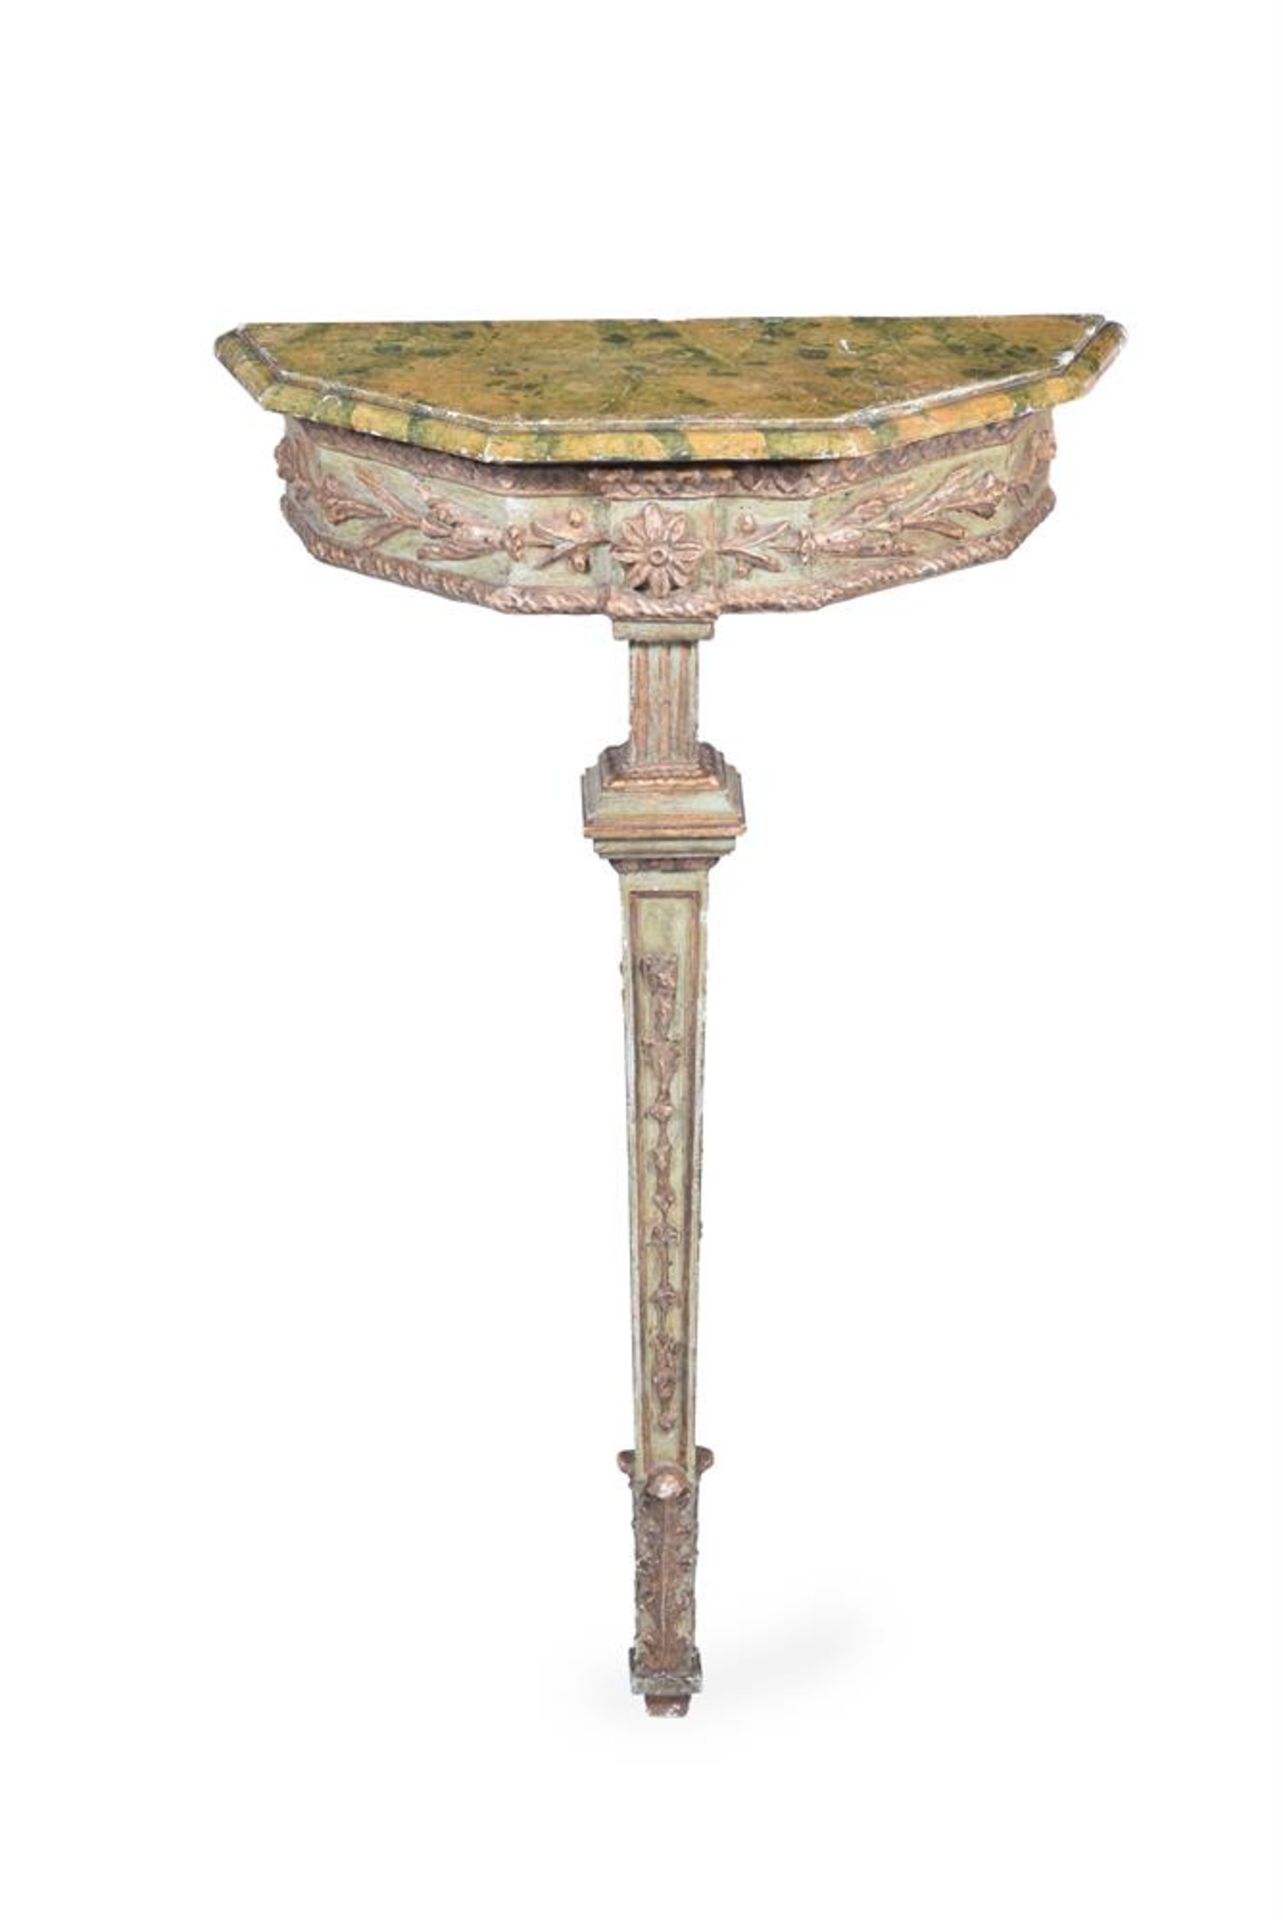 A PAIR OF CONTINENTAL GREEN PAINTED AND SILVERED CONSOLE TABLES, LATE 18TH OR EARLY 19TH CENTURY - Image 2 of 7